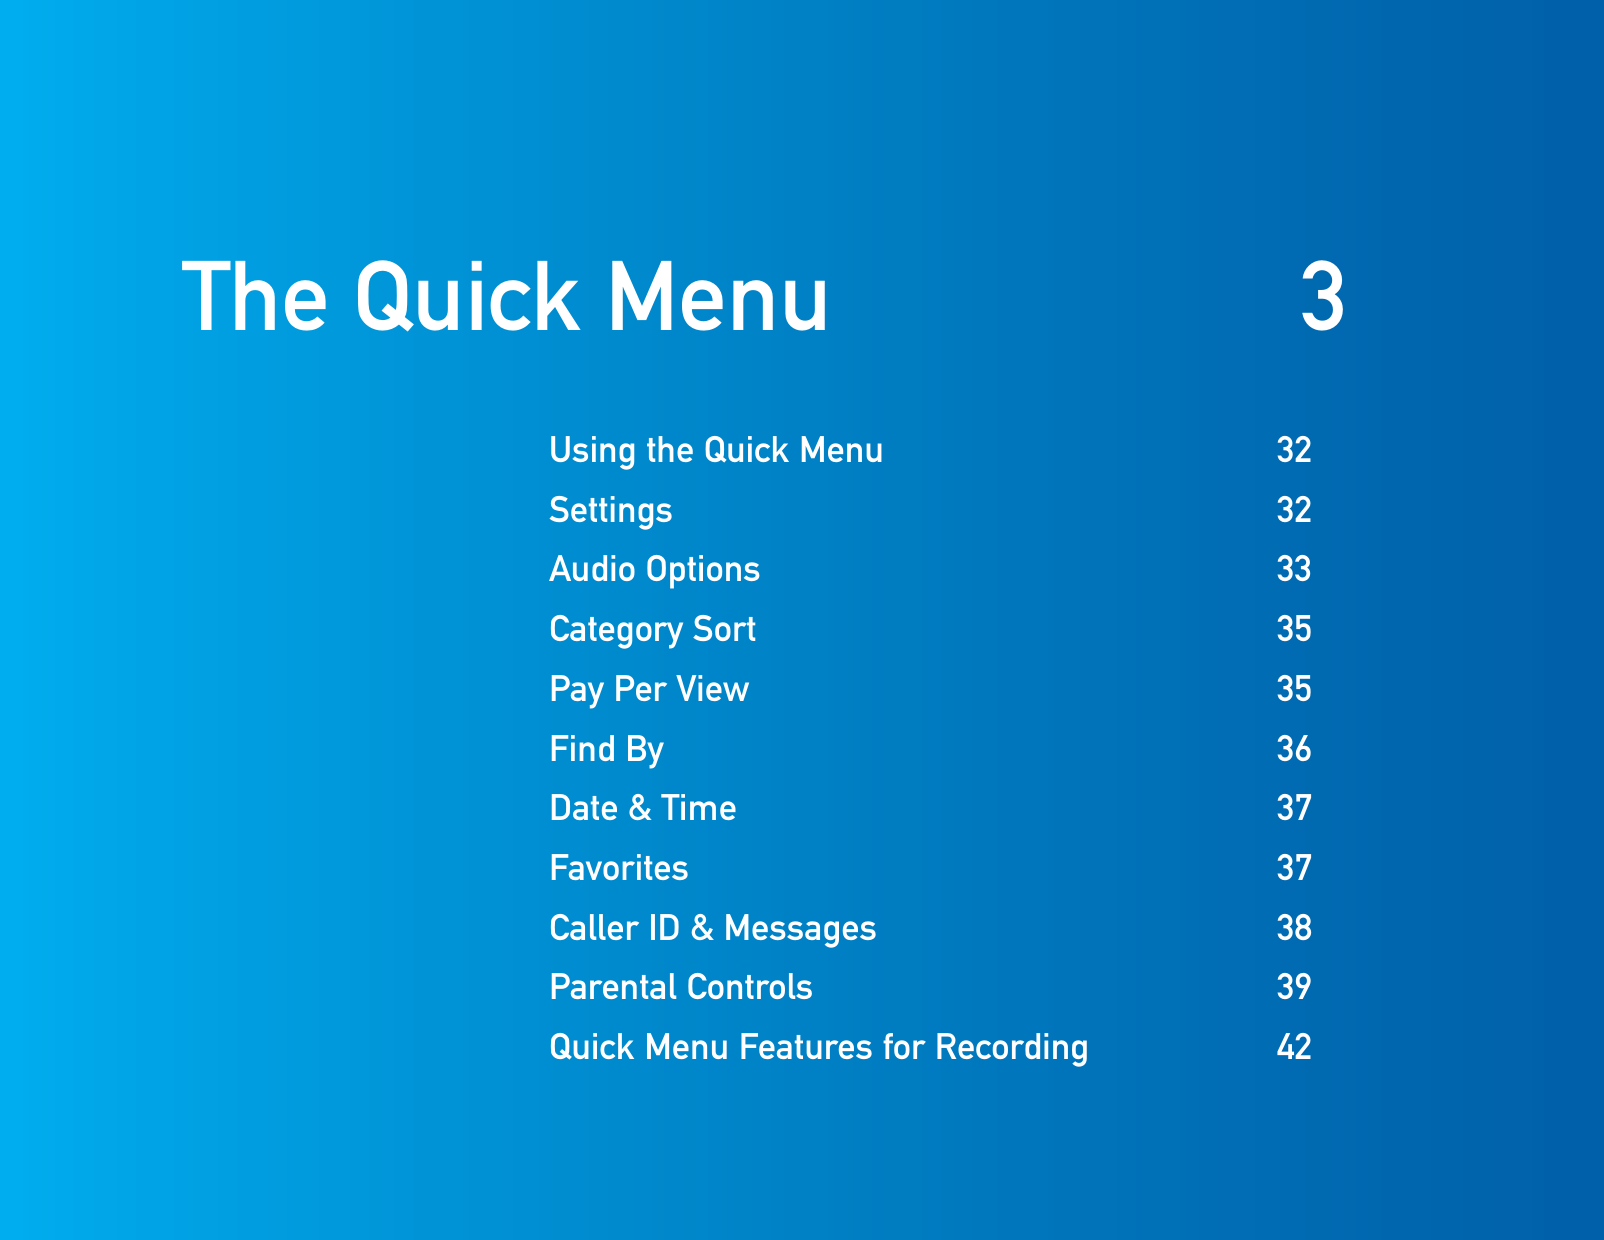 Using the Quick Menu  32Settings 32Audio Options  33Category Sort  35 Pay Per View  35Find By  36  Date  &amp;  Time  37 Favorites  37 Caller ID &amp;   Messages  38       Parental  Controls  39       Quick  Menu  Features  for  Recording  42The Quick Menu  3